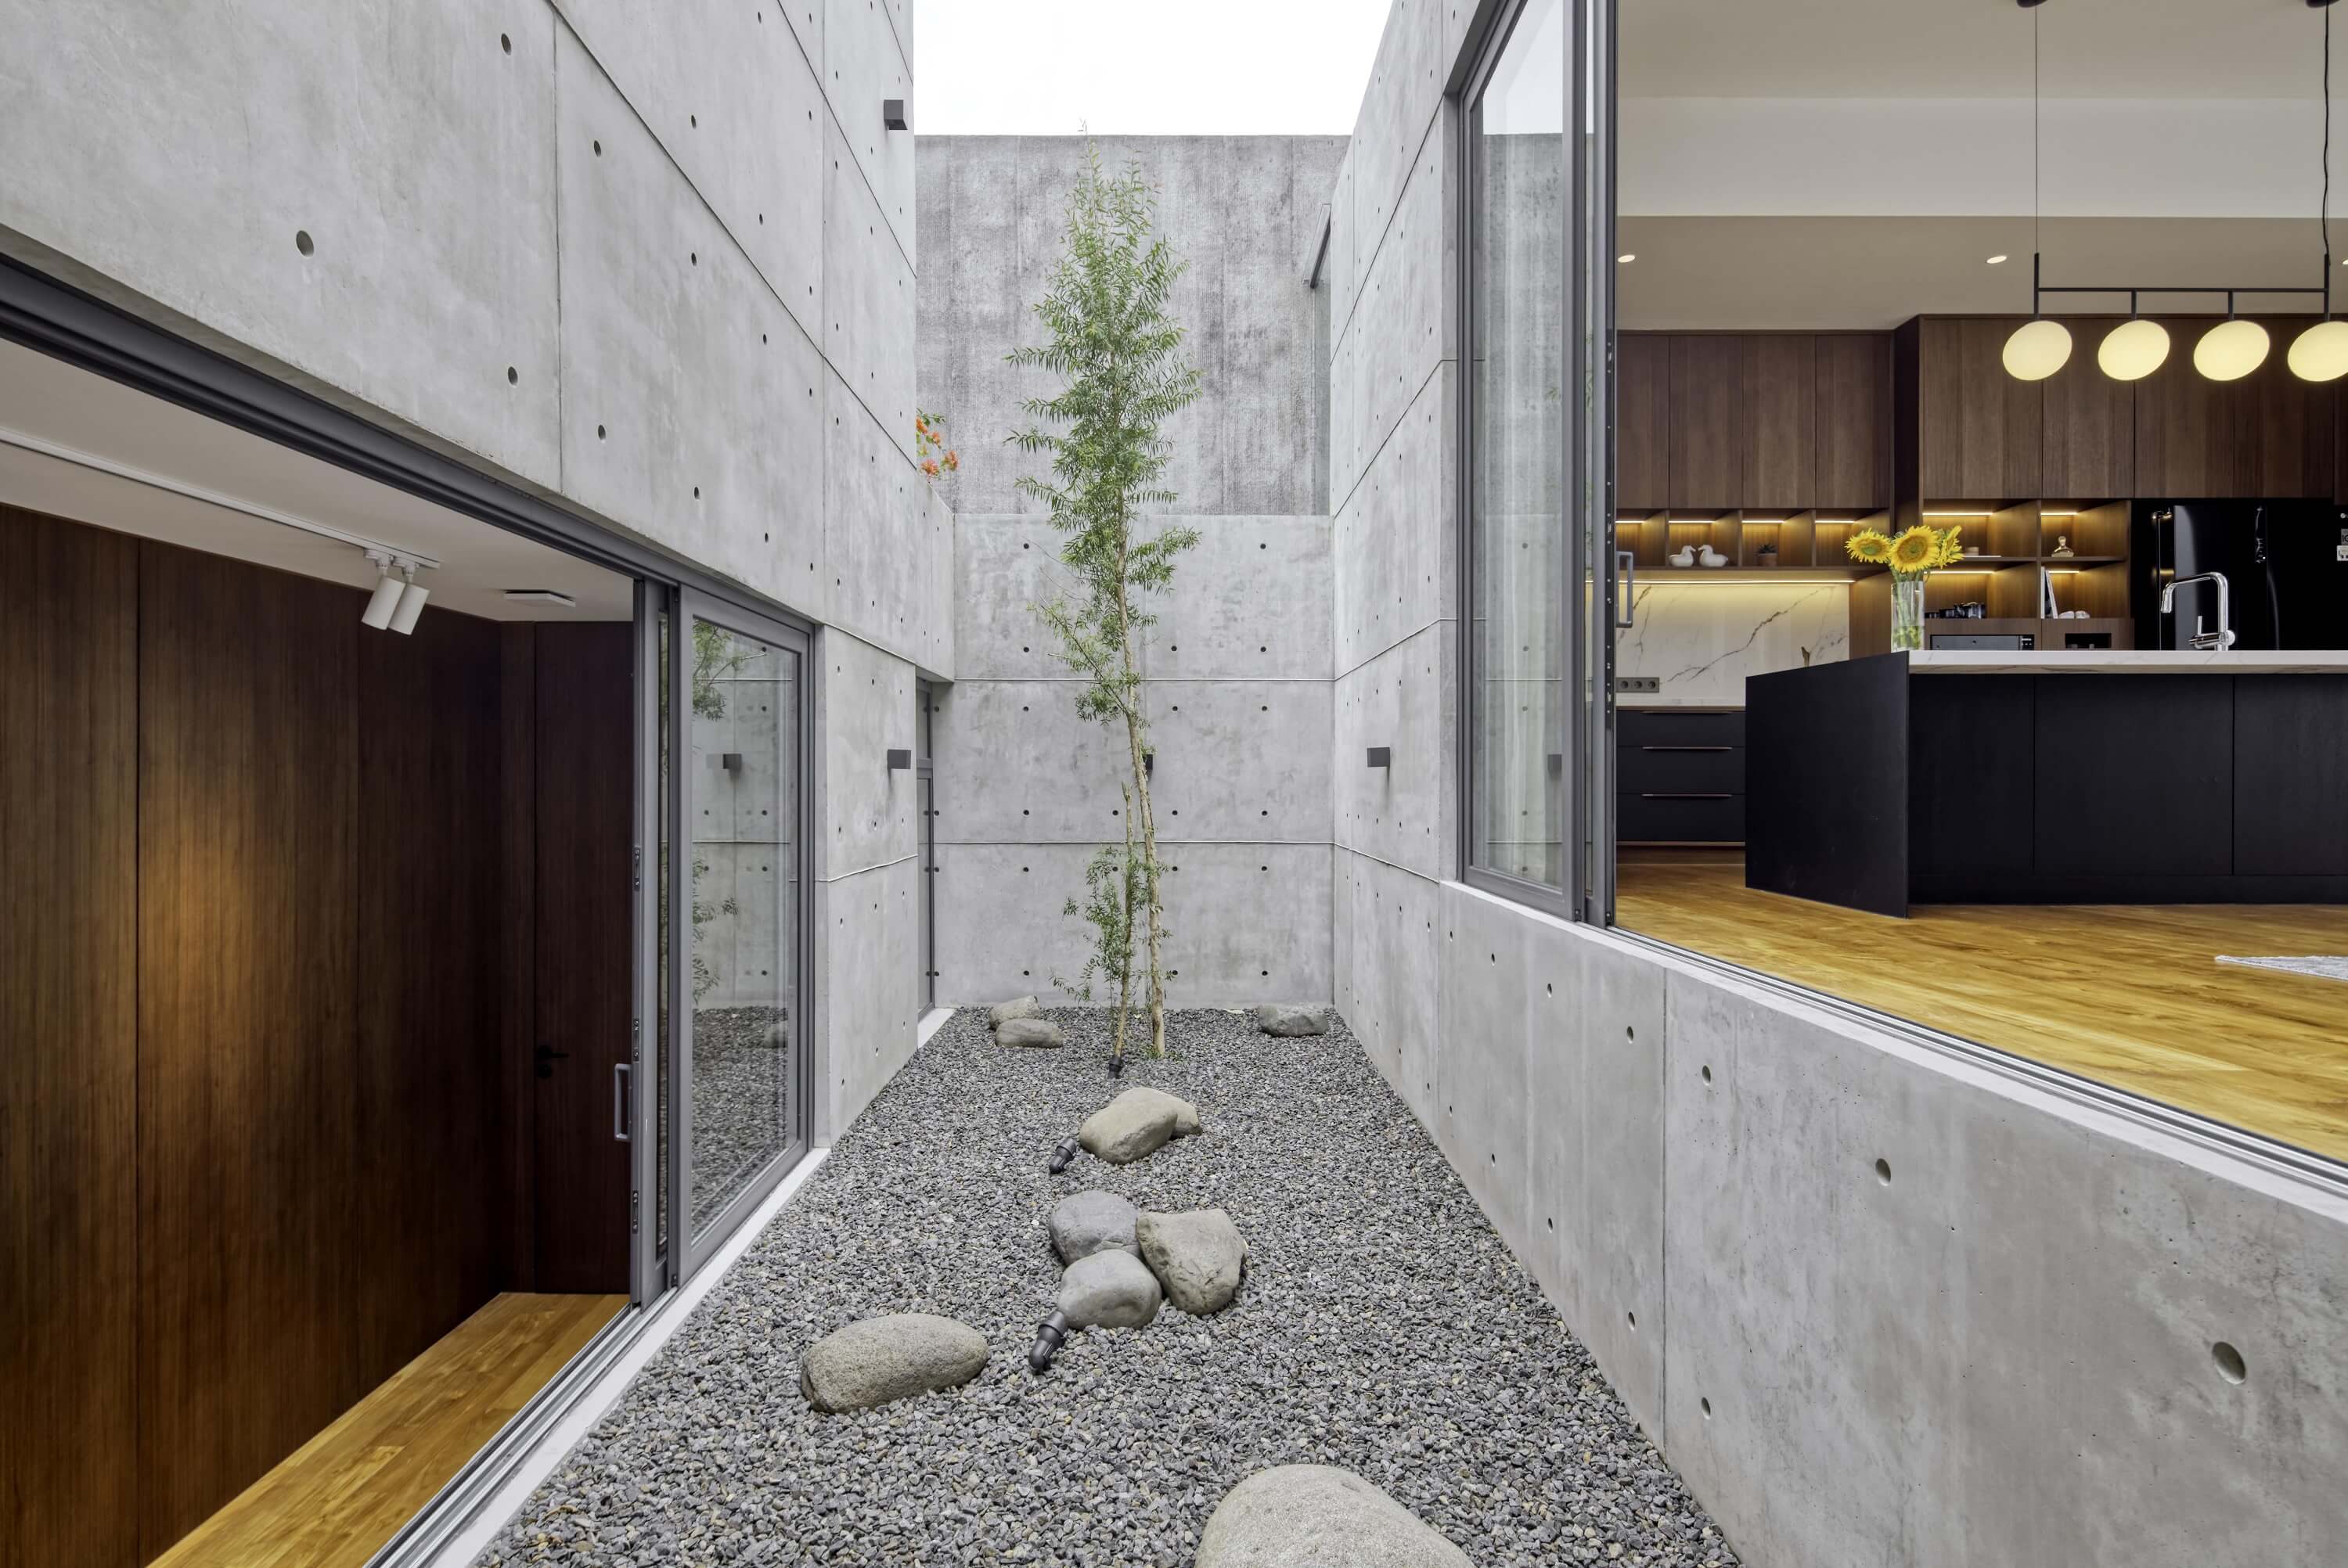 The courtyards serve as a source of light and air for the adjacent masses